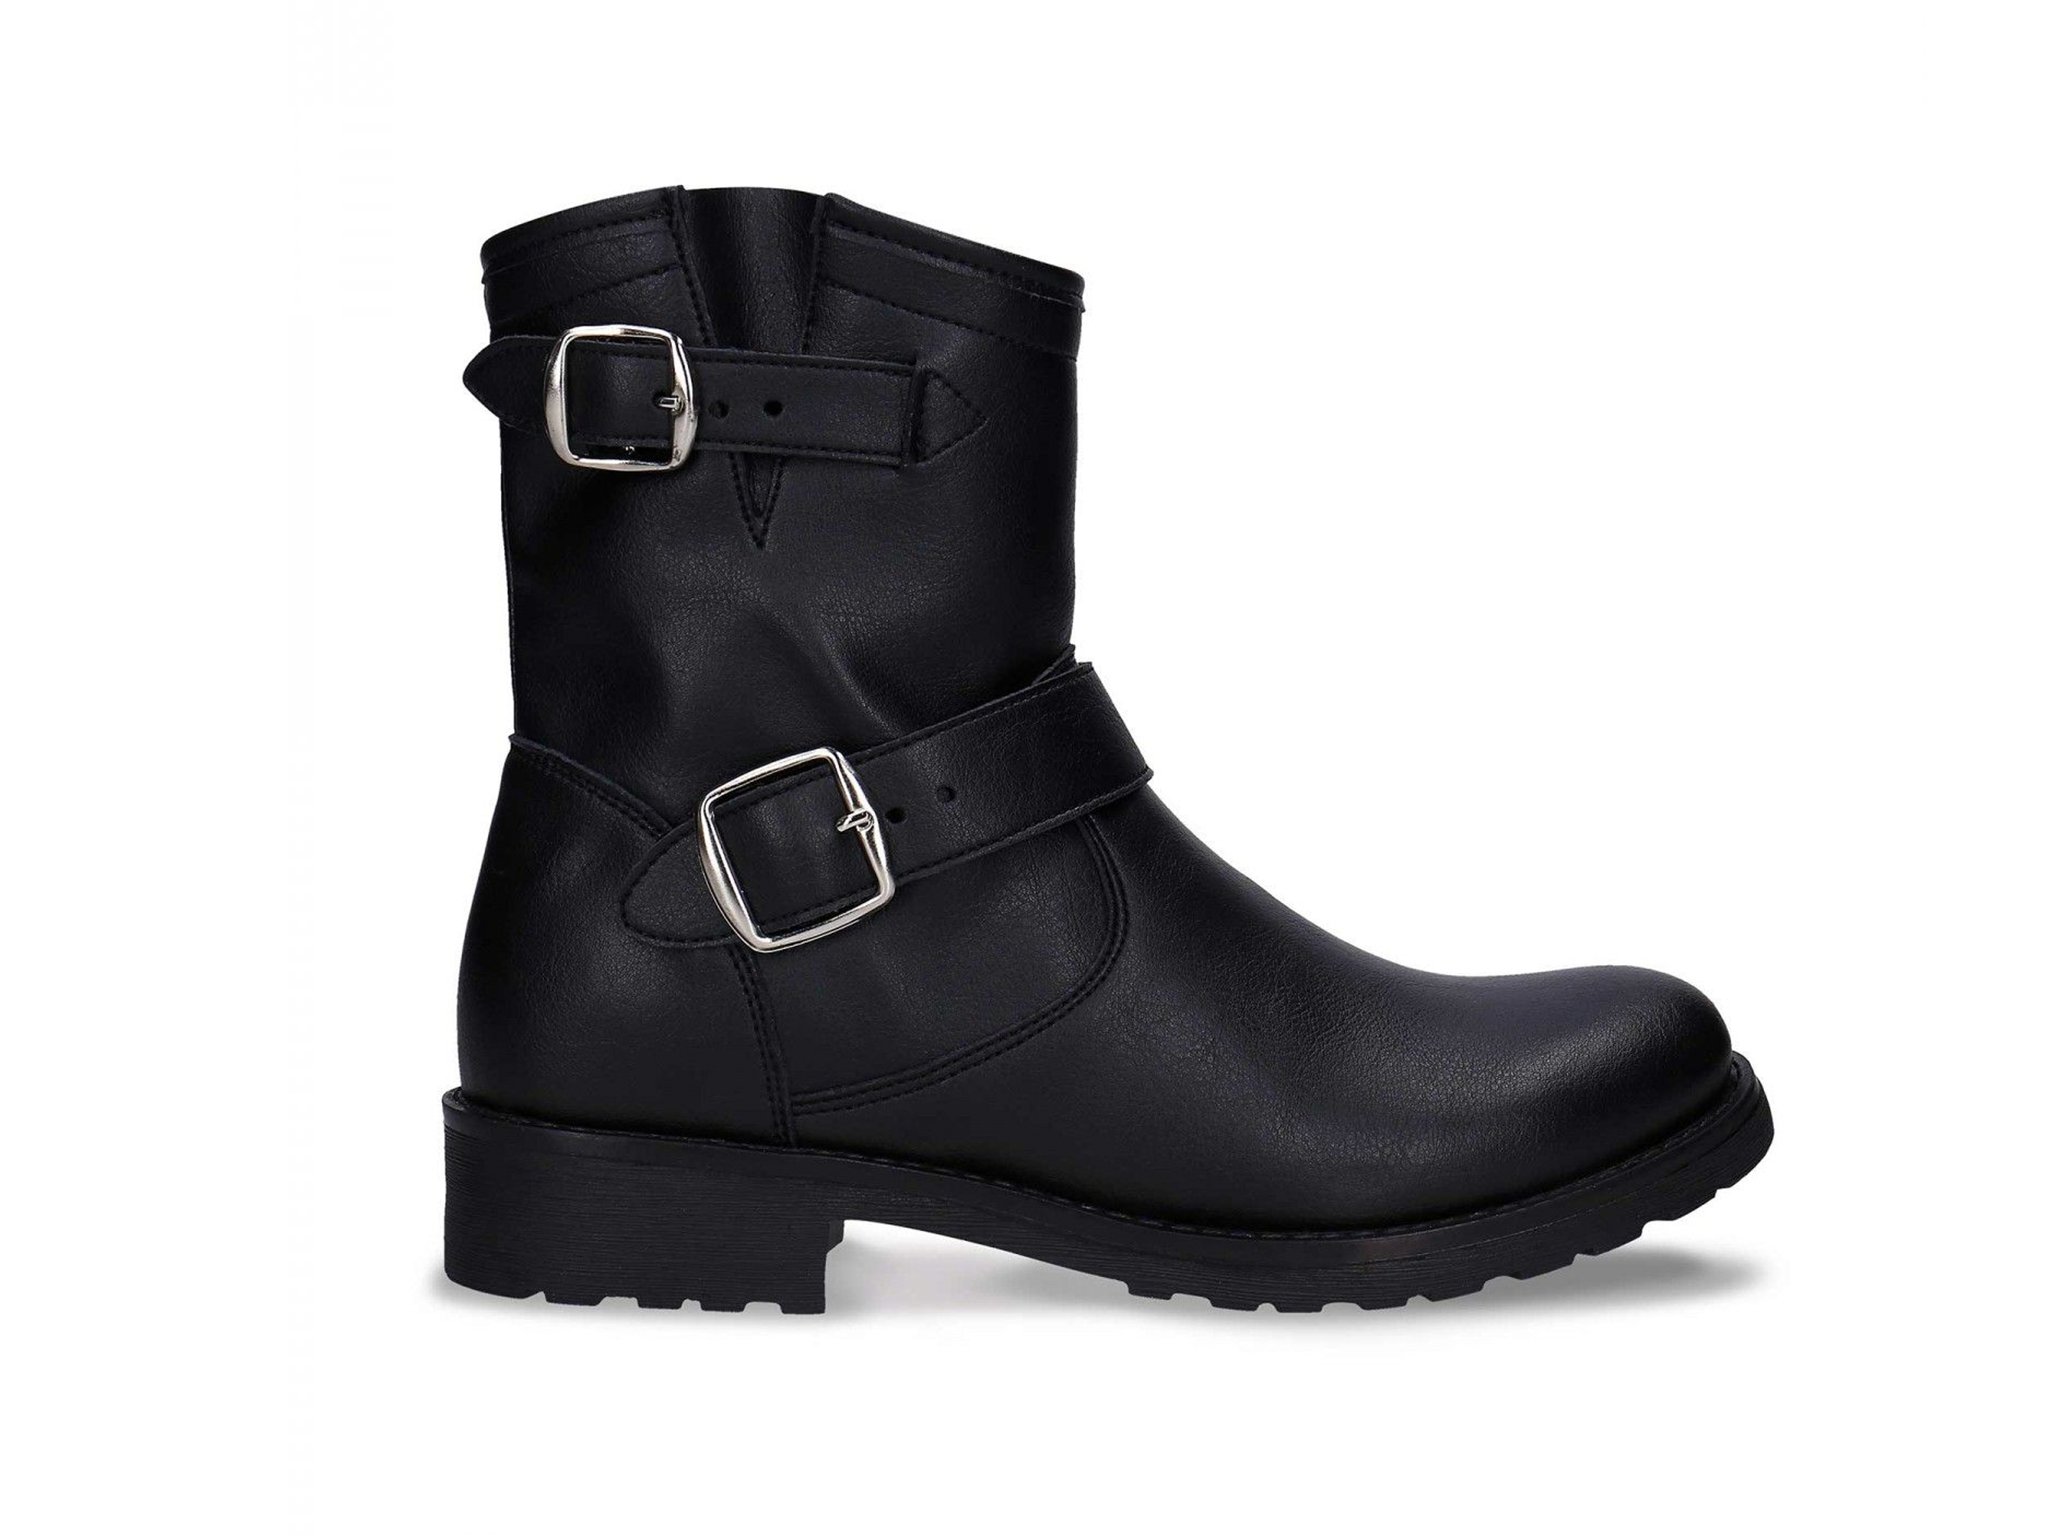 13 best women’s vegan boots that will be the mainstay of your wardrobe